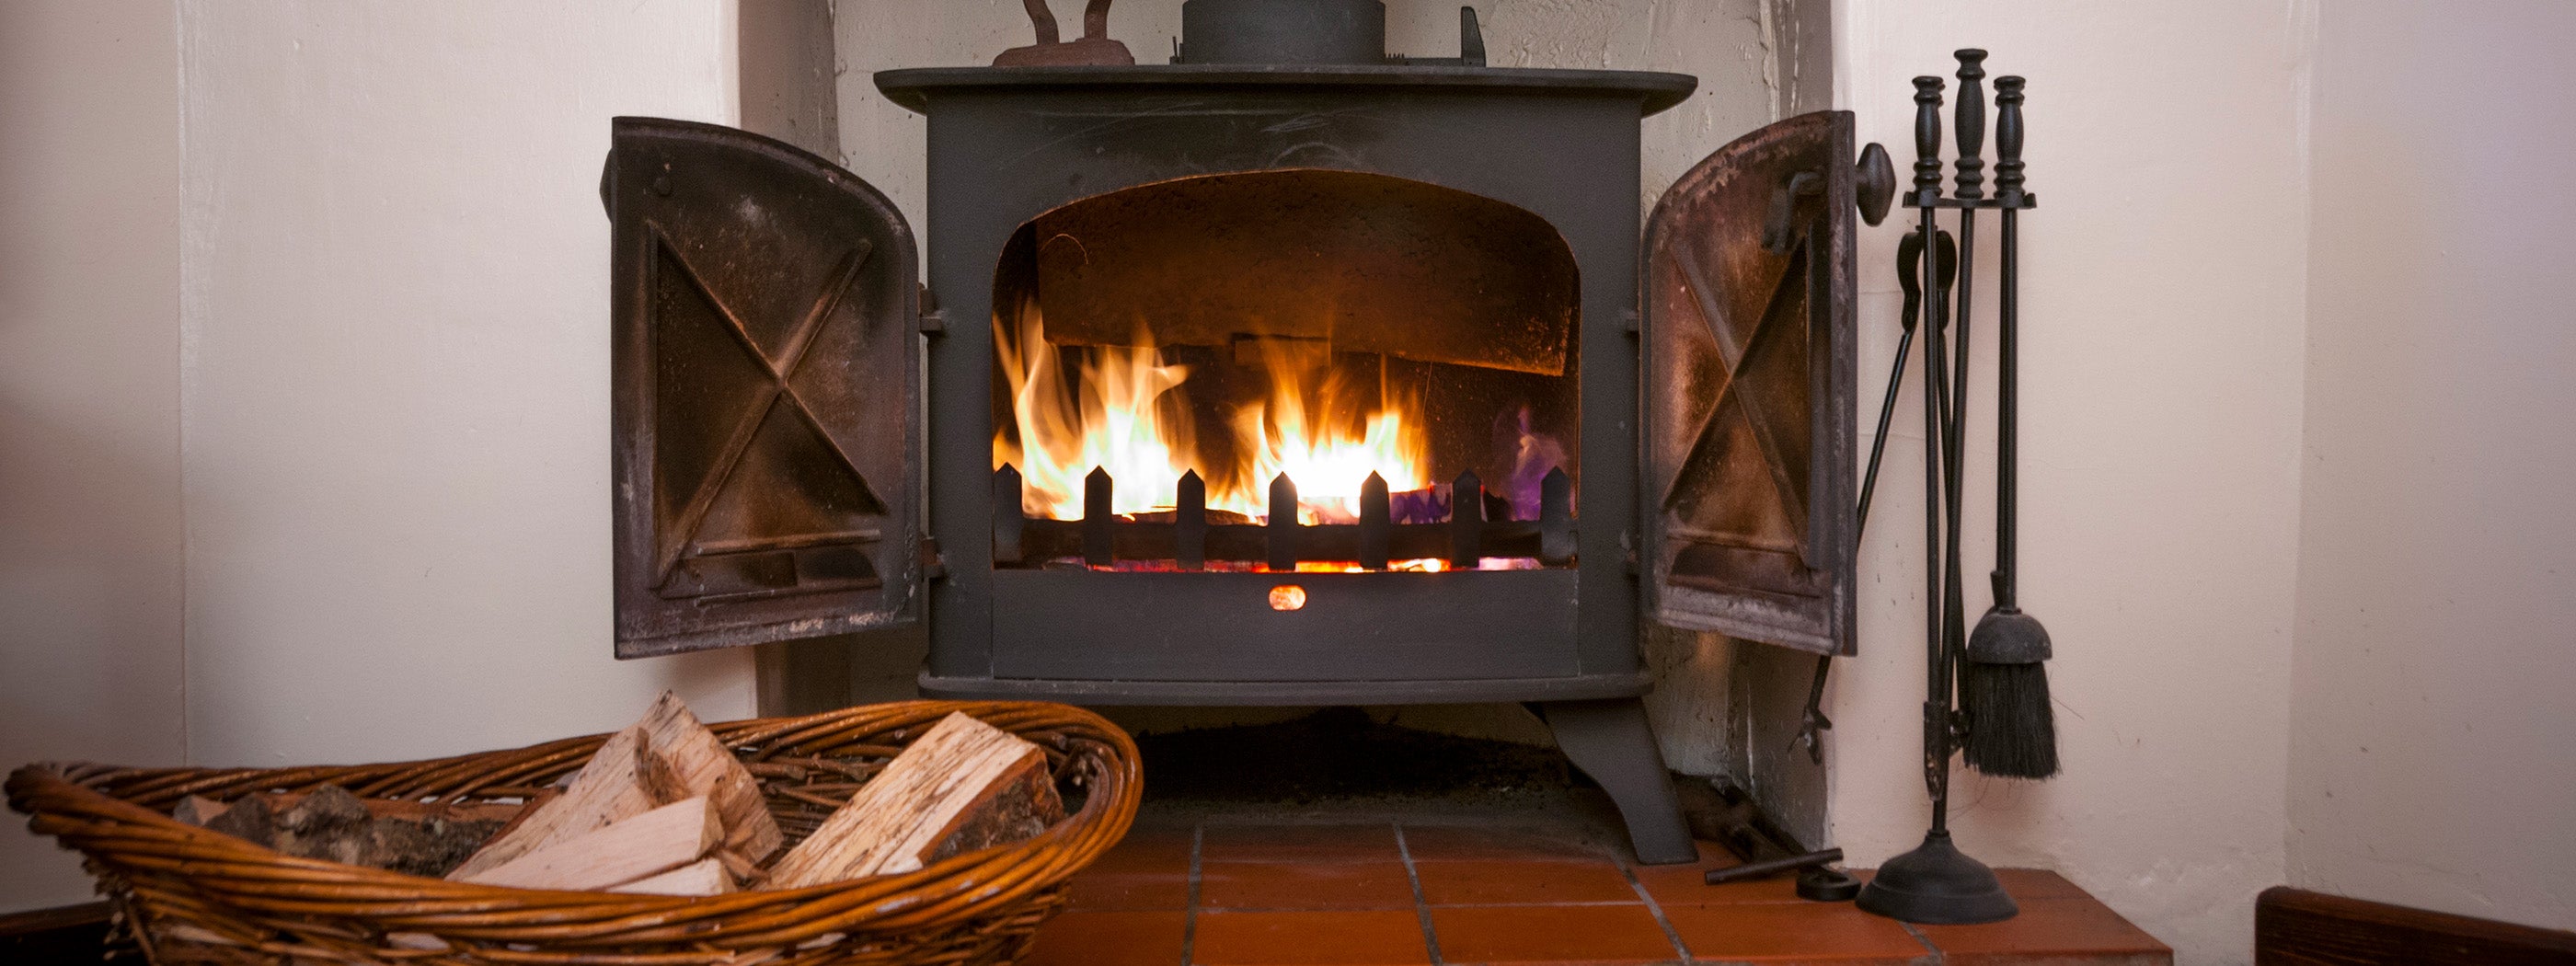 Wood Fire Places & Stoves